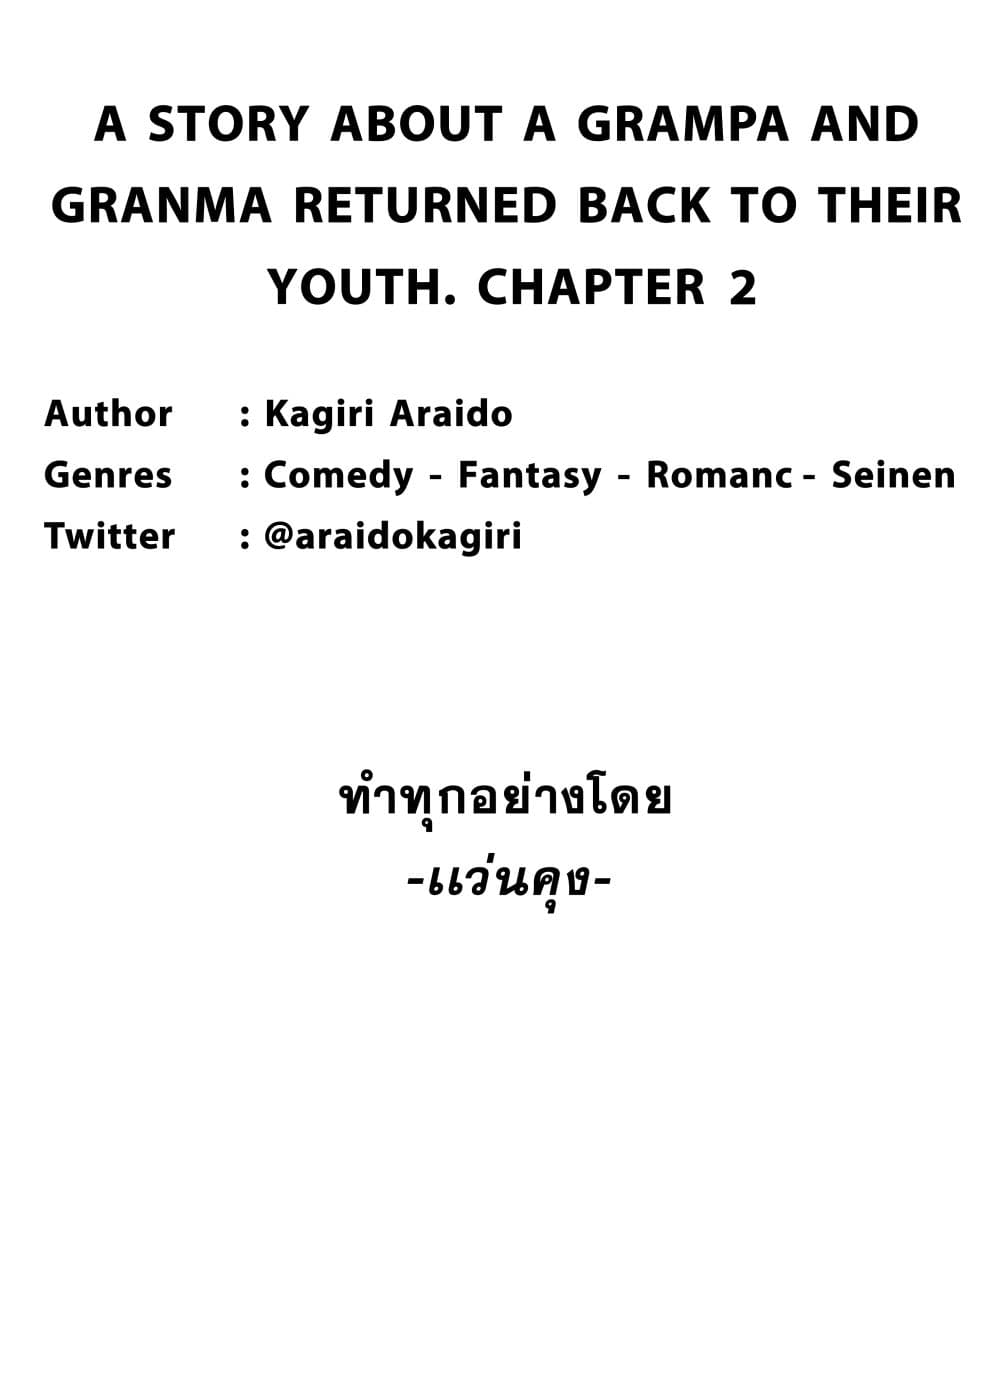 A Story About A Grampa and Granma Returned Back to their Youth คู่รักวัยดึกหวนคืนวัยหวาน 2-2